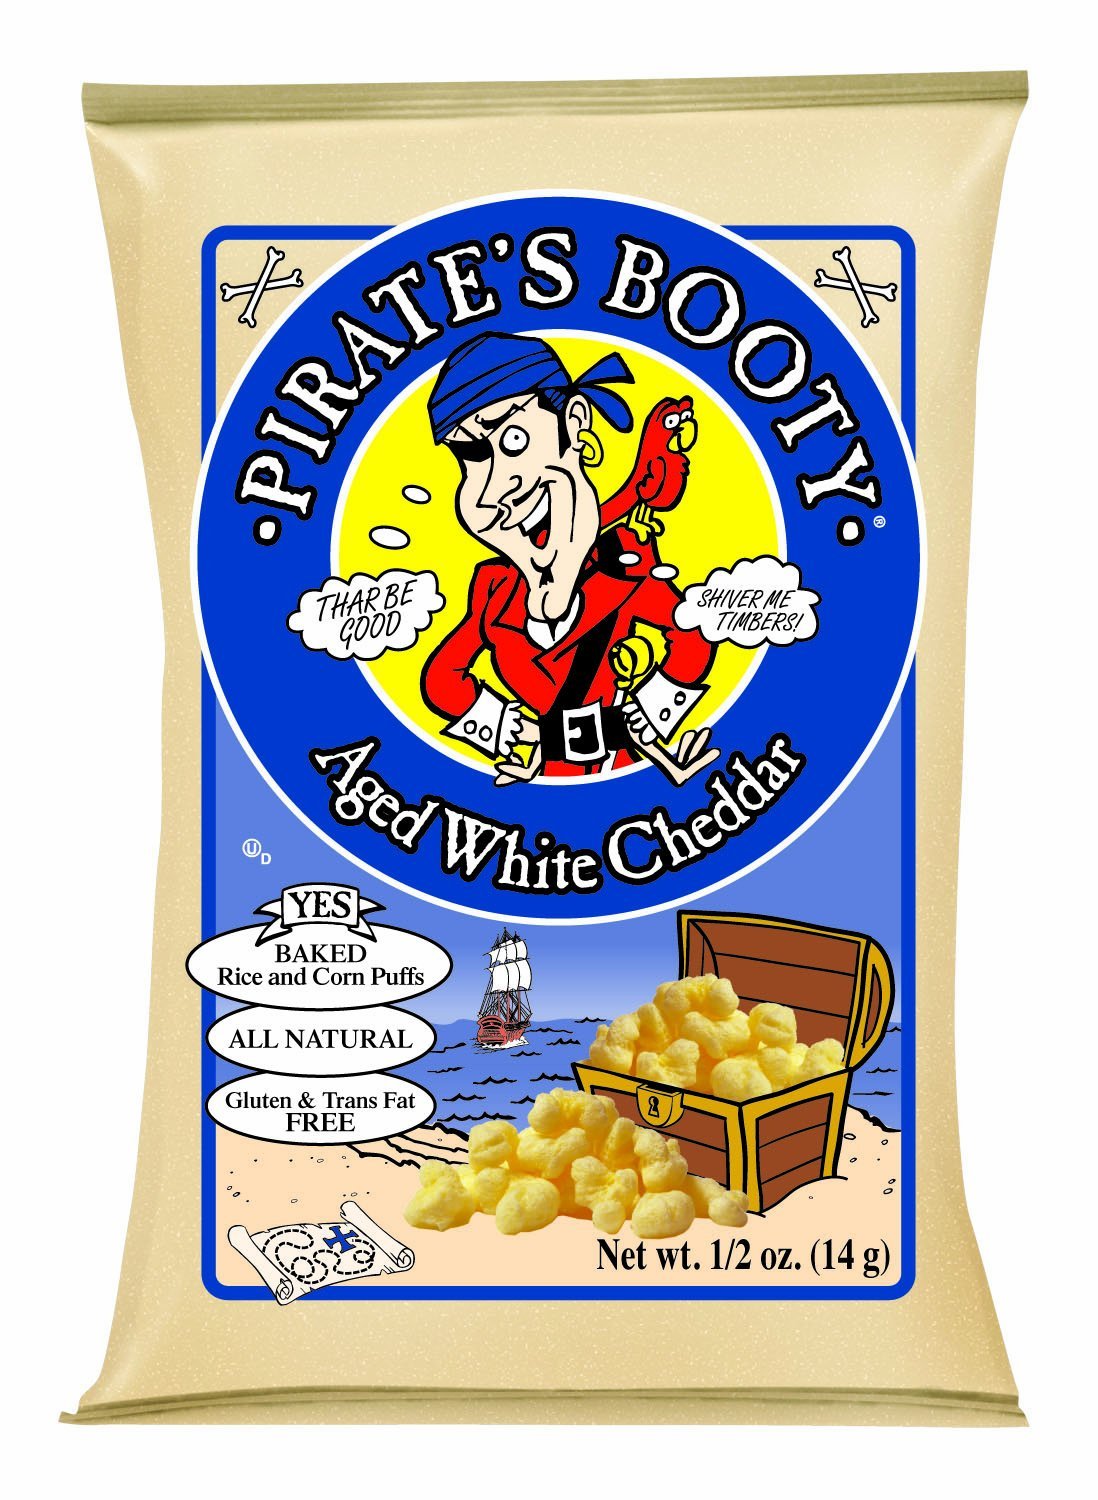 Pirates-Booty-Aged-White-Cheddar-Baked-Rice-and-Corn-Puffs-Snacks.jpg